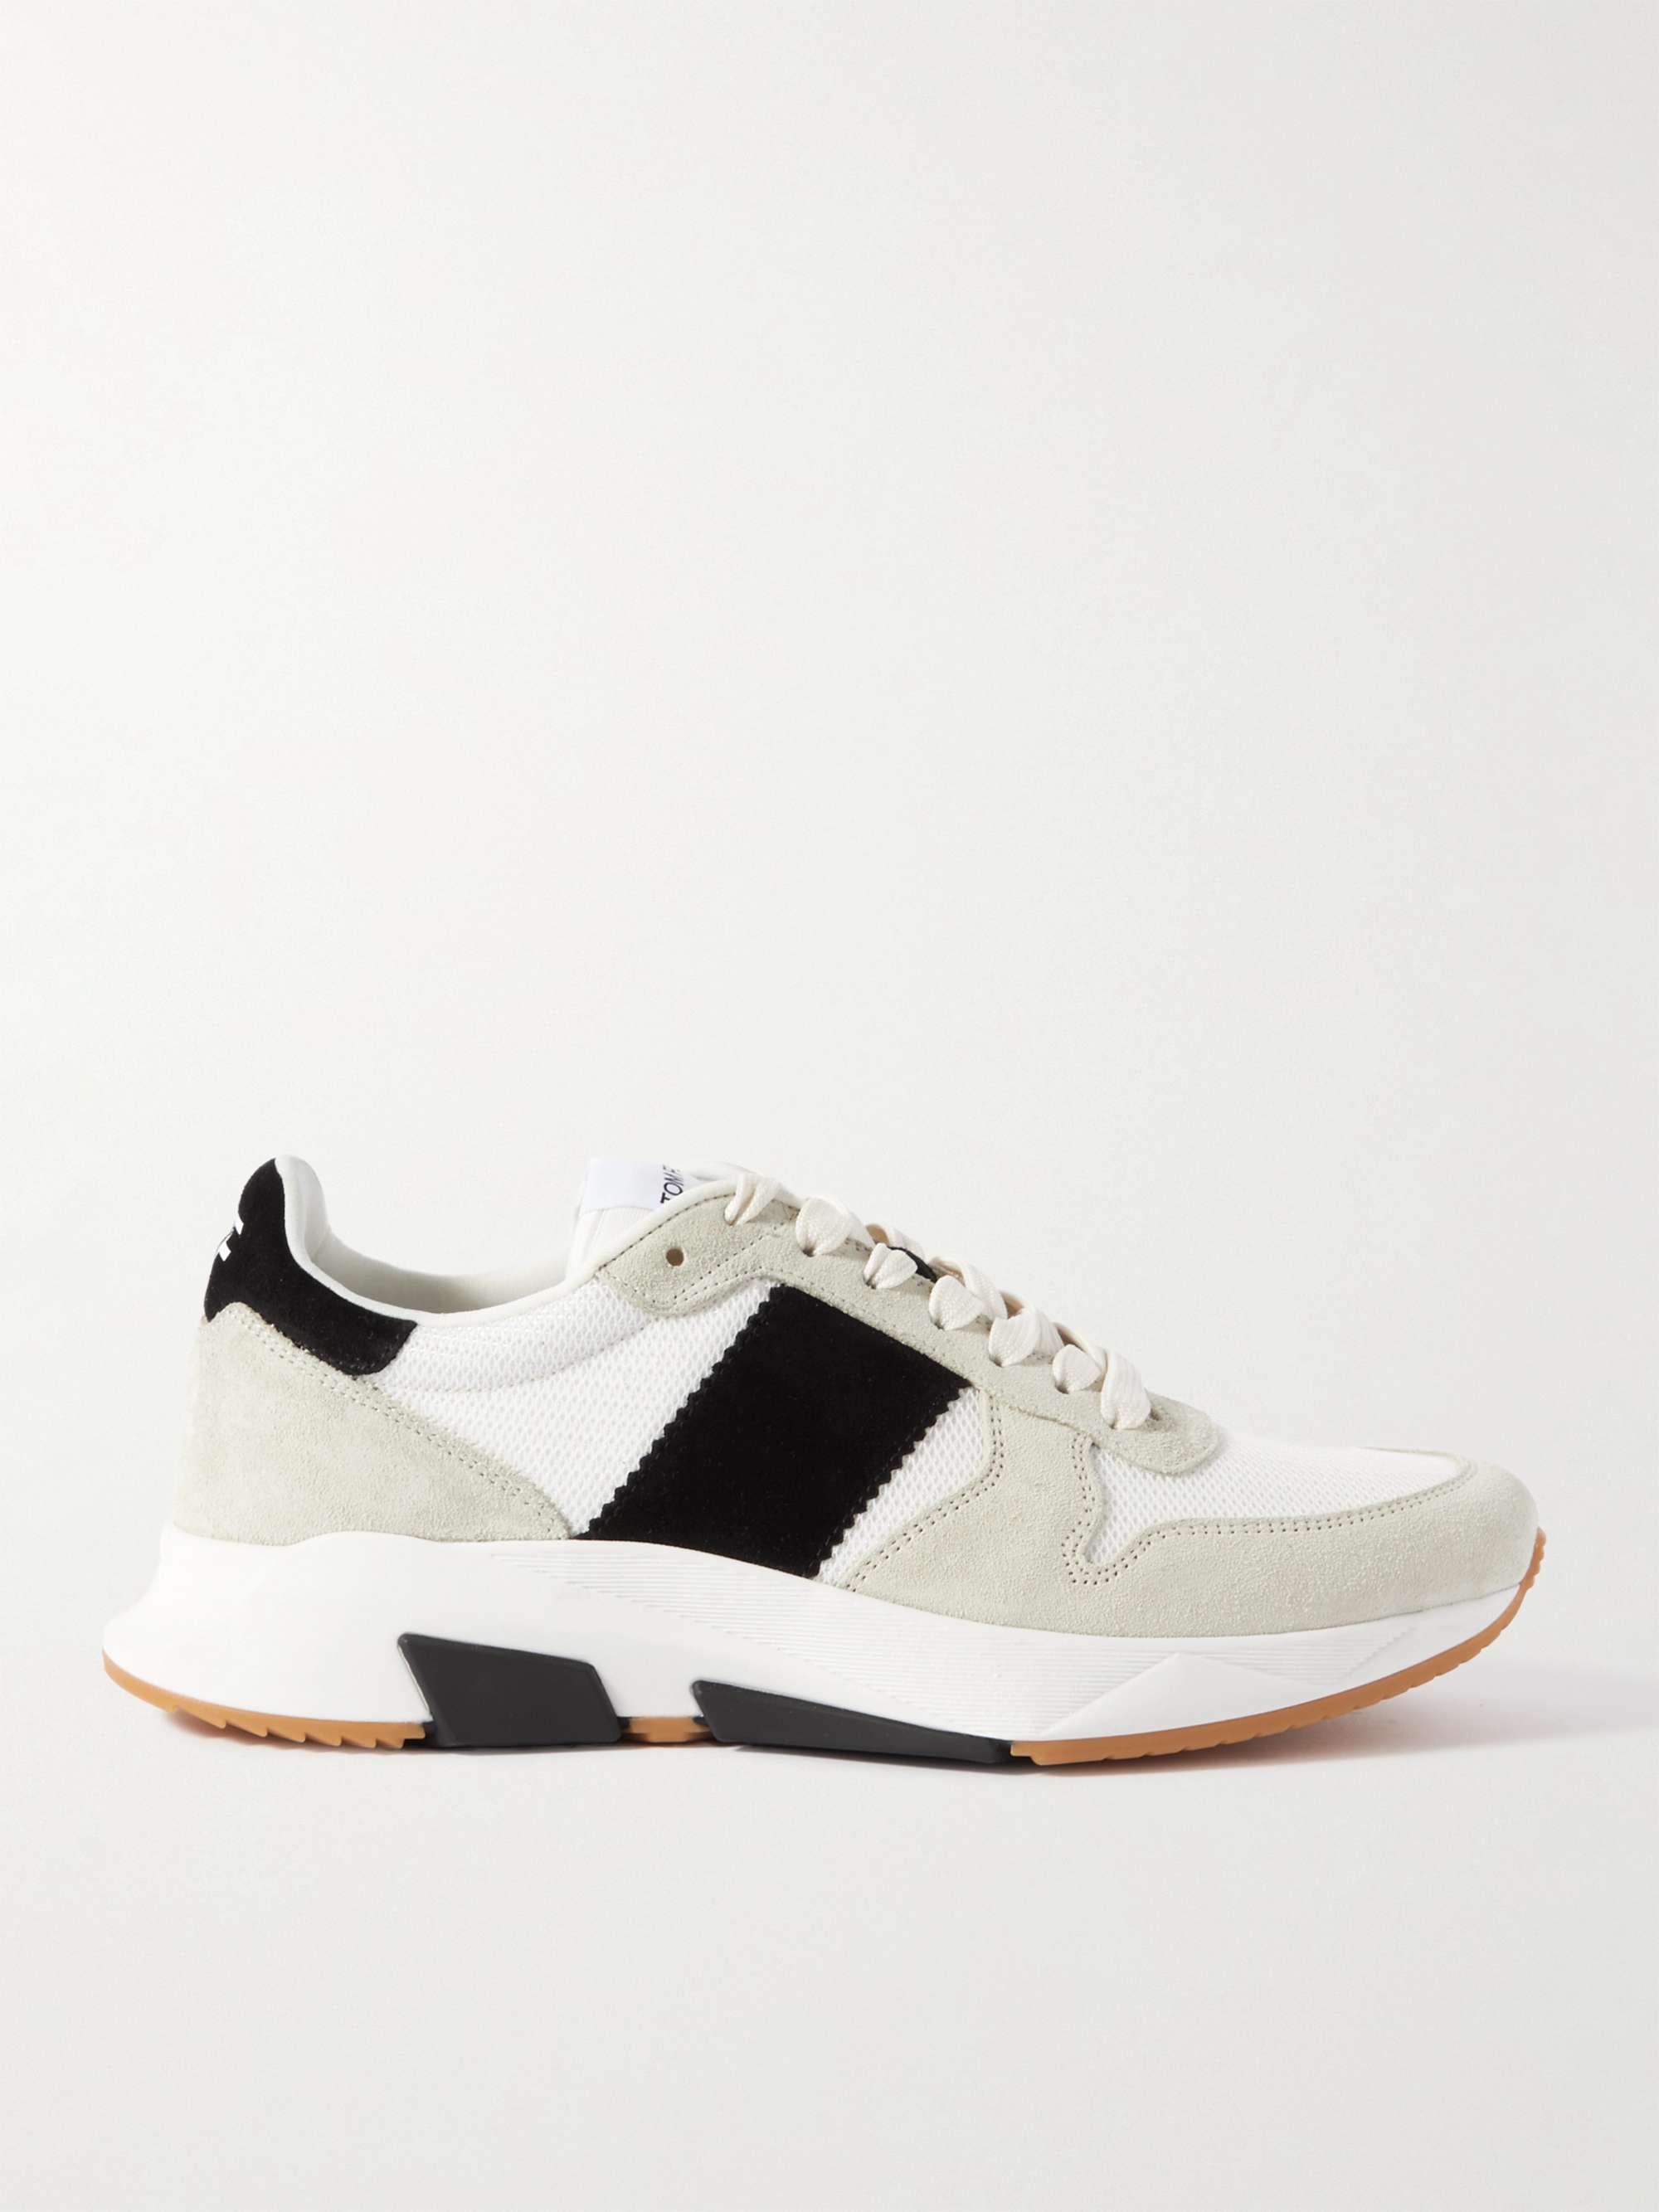 TOM FORD Jagga Suede and Mesh Sneakers